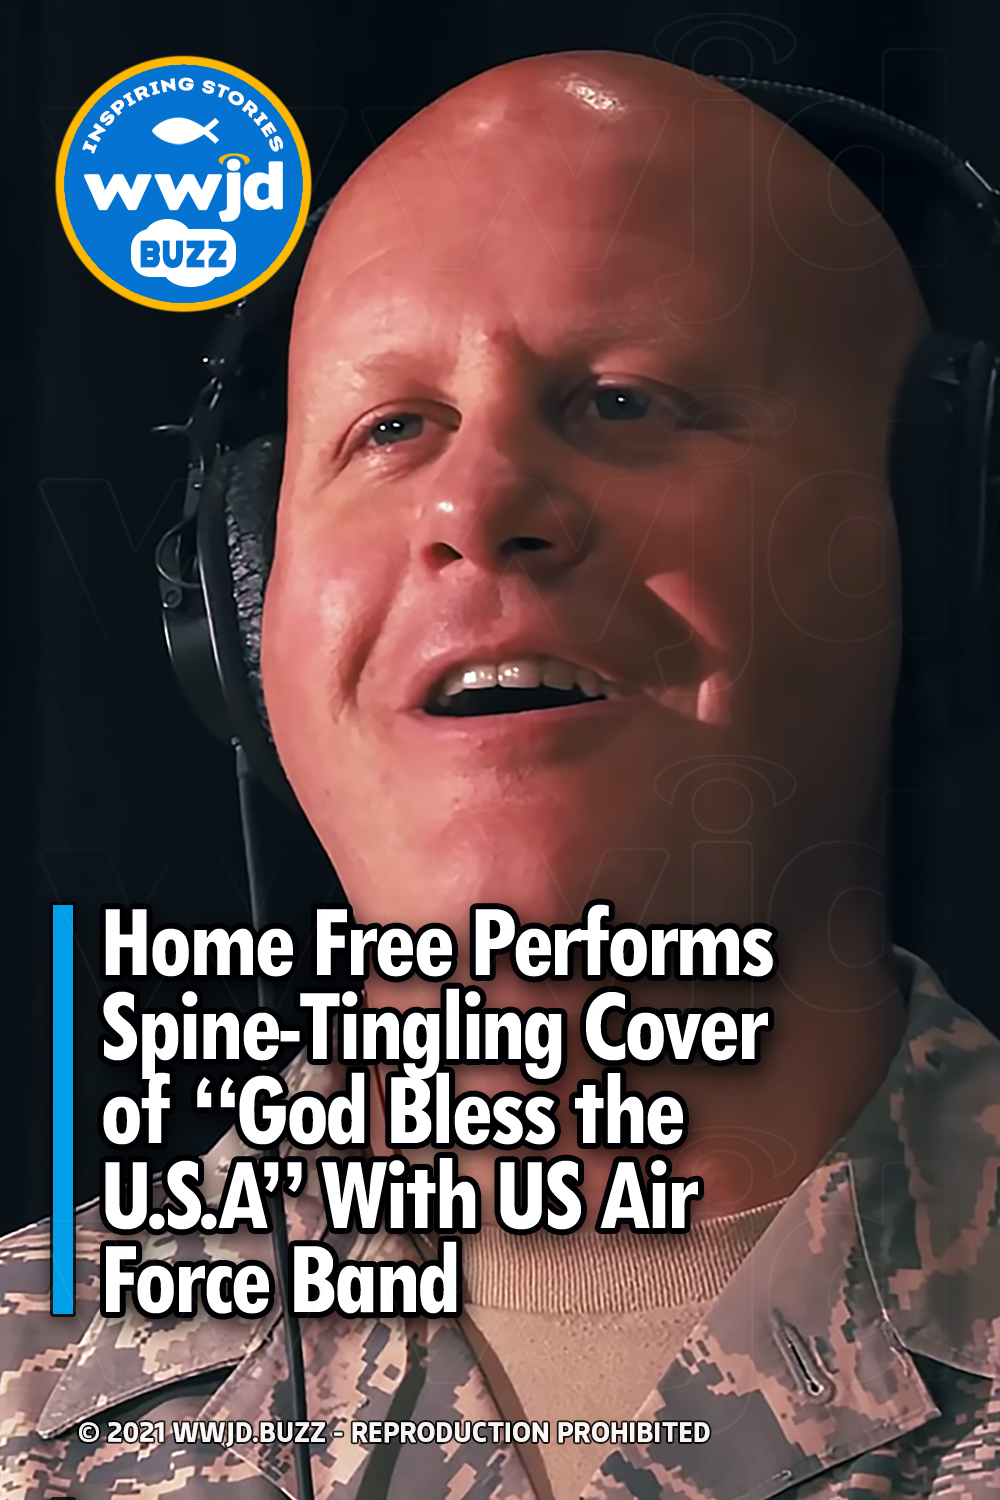 Home Free Performs Spine-Tingling Cover of “God Bless the U.S.A” With US Air Force Band